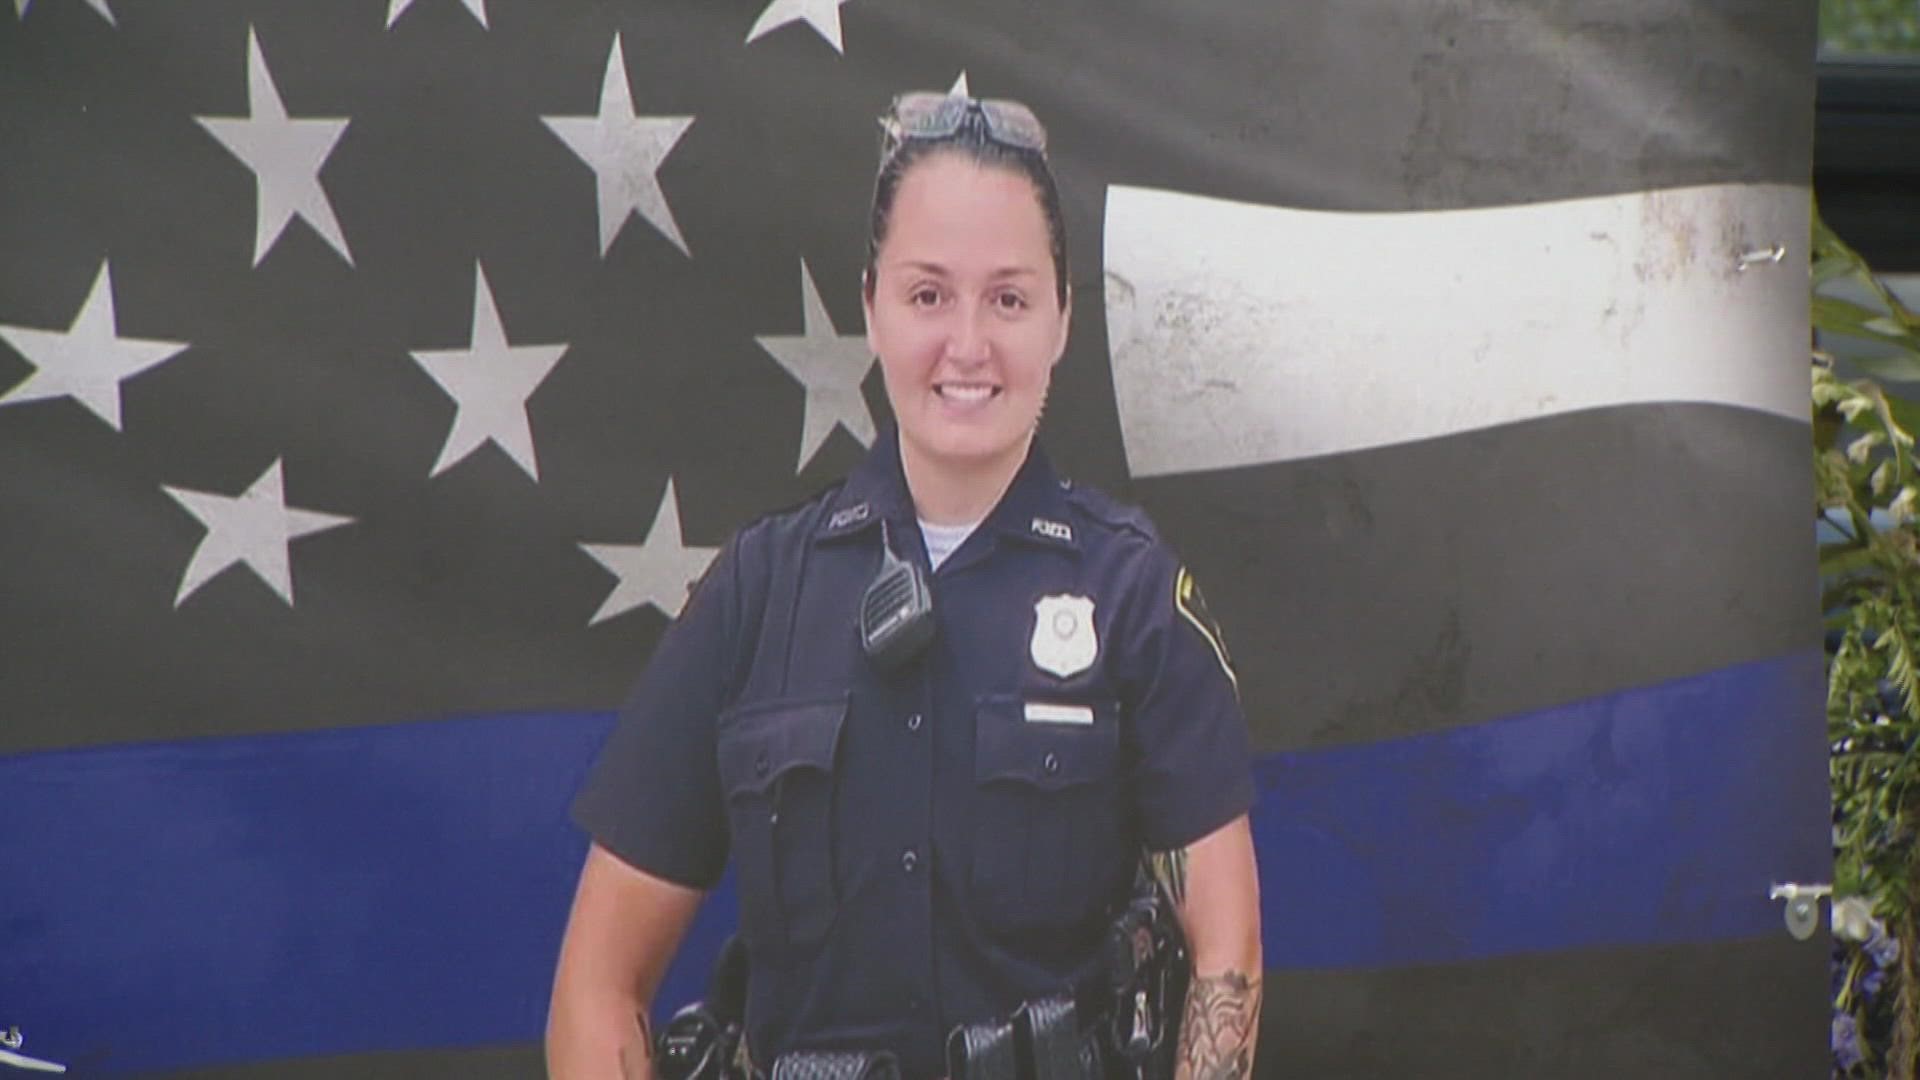 Hoosiers are coming together to honor the life of  Richmond officer Seara Burton, who died 5 weeks after she was shot in the line of duty.